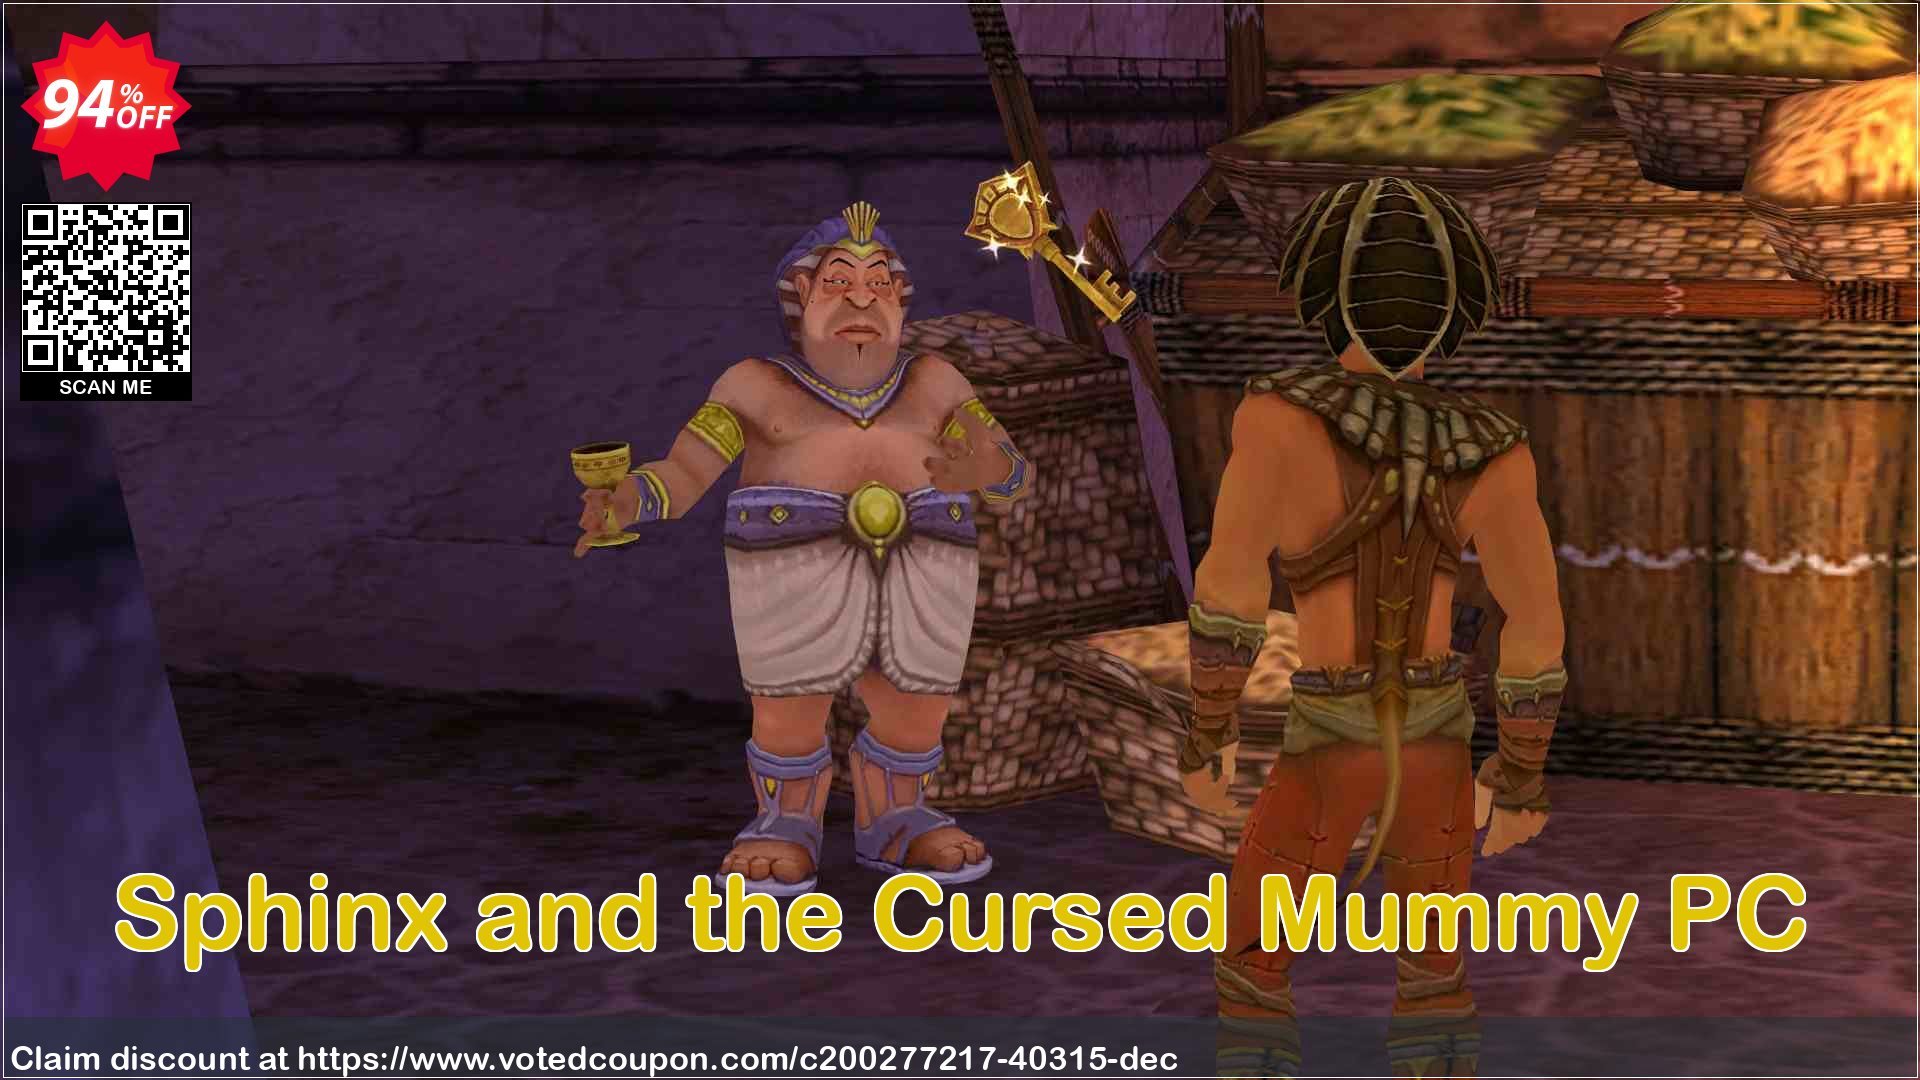 Sphinx and the Cursed Mummy PC Coupon Code May 2024, 94% OFF - VotedCoupon